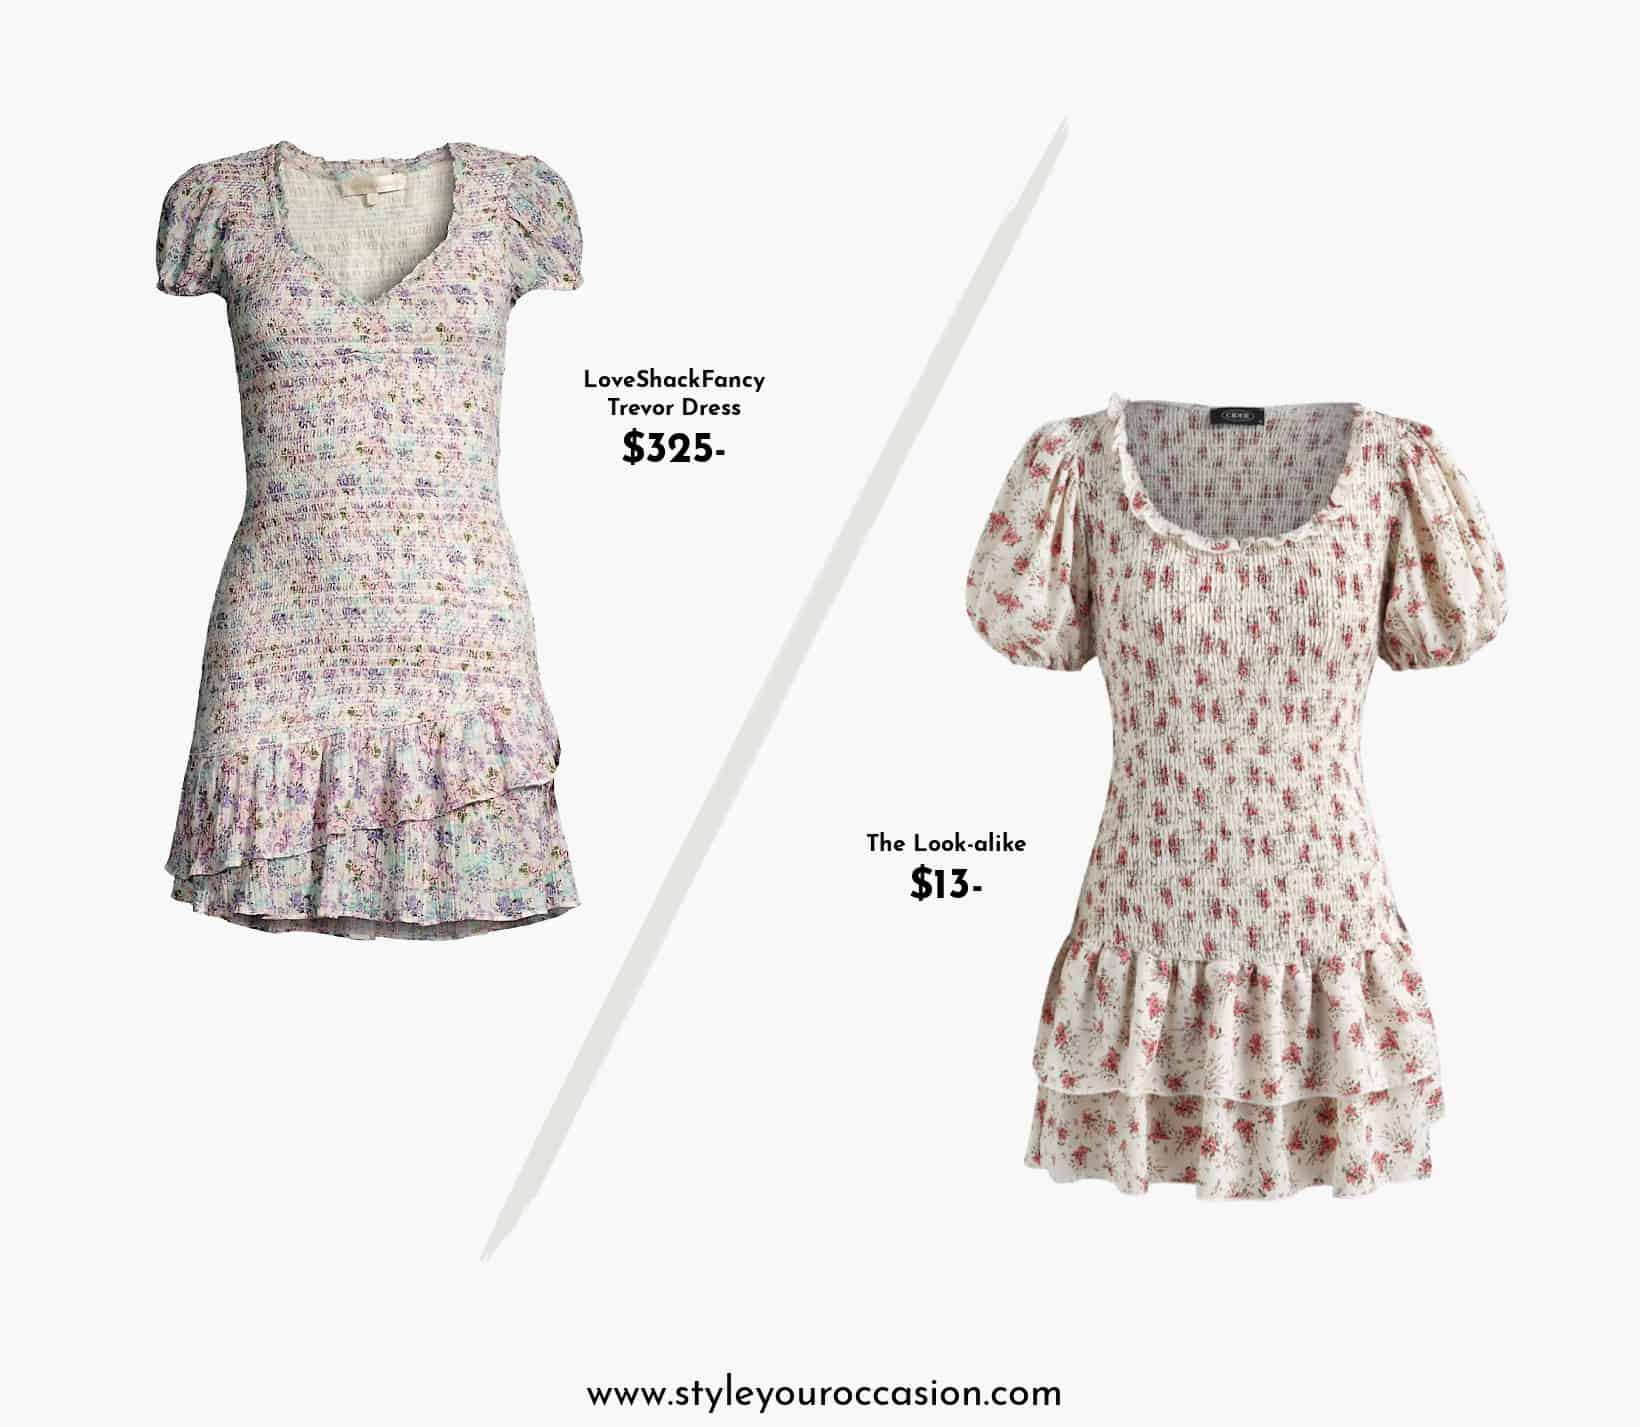 image of two short-sleeve shirred floral mini dresses that look alike